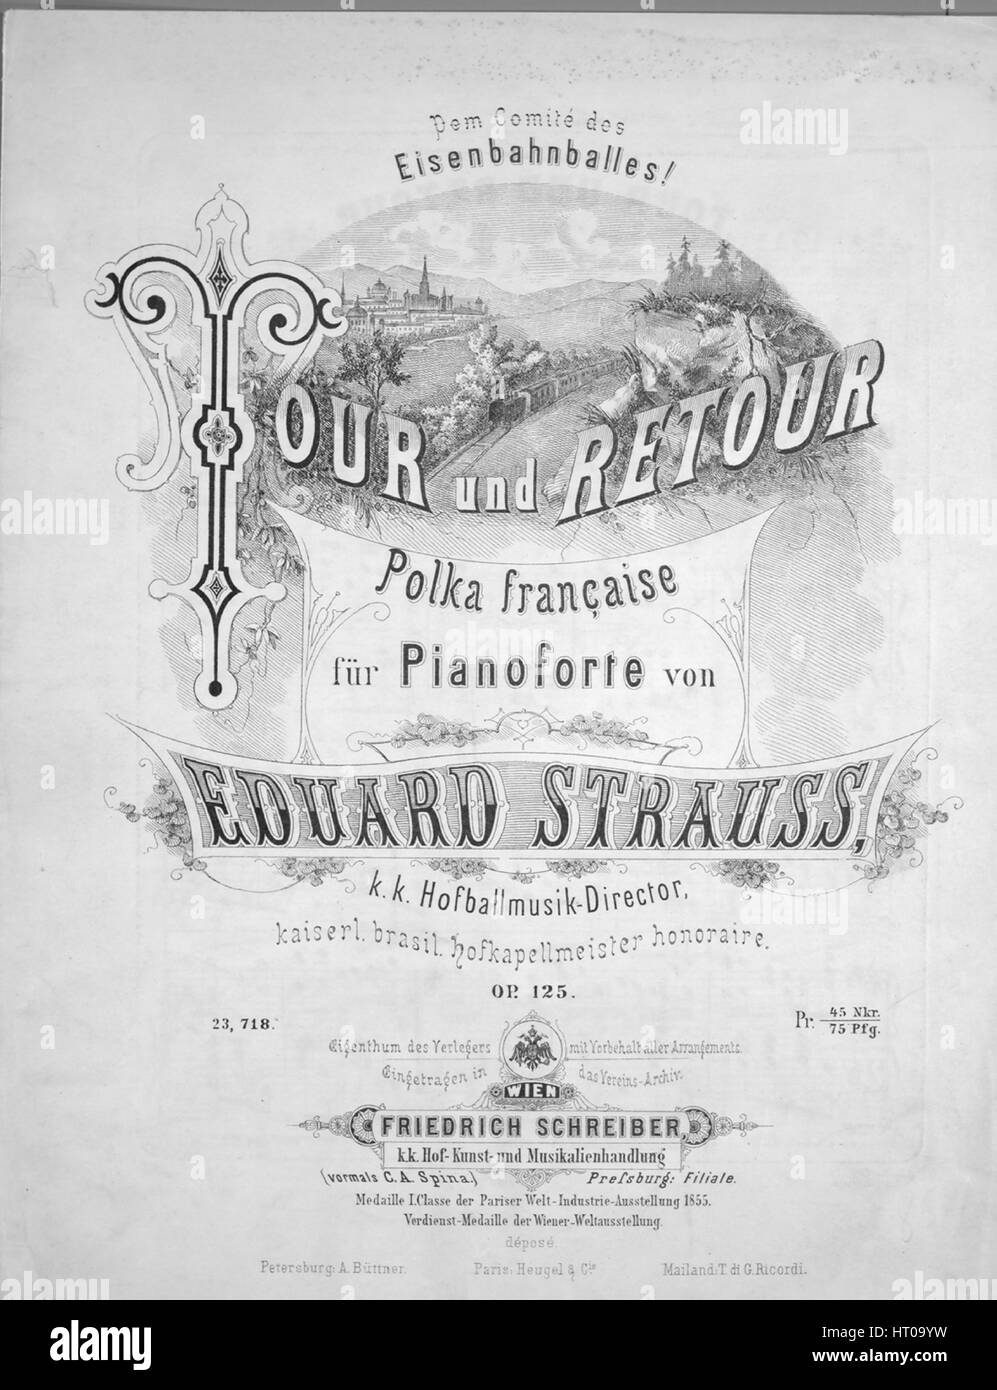 Sheet music cover image of the song 'Dem Comite des Eisenbahnballes! Tour und Retour Polka Francaise fur Pianoforte', with original authorship notes reading 'Von Eduard Strauss, KK Hofballmusik-Director,  Kaiserl brasilhofkapellmeister Honoraire, Op 125', 1900. The publisher is listed as 'Friedrich Schreiber', the form of composition is 'da capo with trio', the instrumentation is 'piano', the first line reads 'None', and the illustration artist is listed as 'Kk. Hoflith. and Steindry G. Wegelein Wien; Stich von F. Hahn in Wien'. Stock Photo